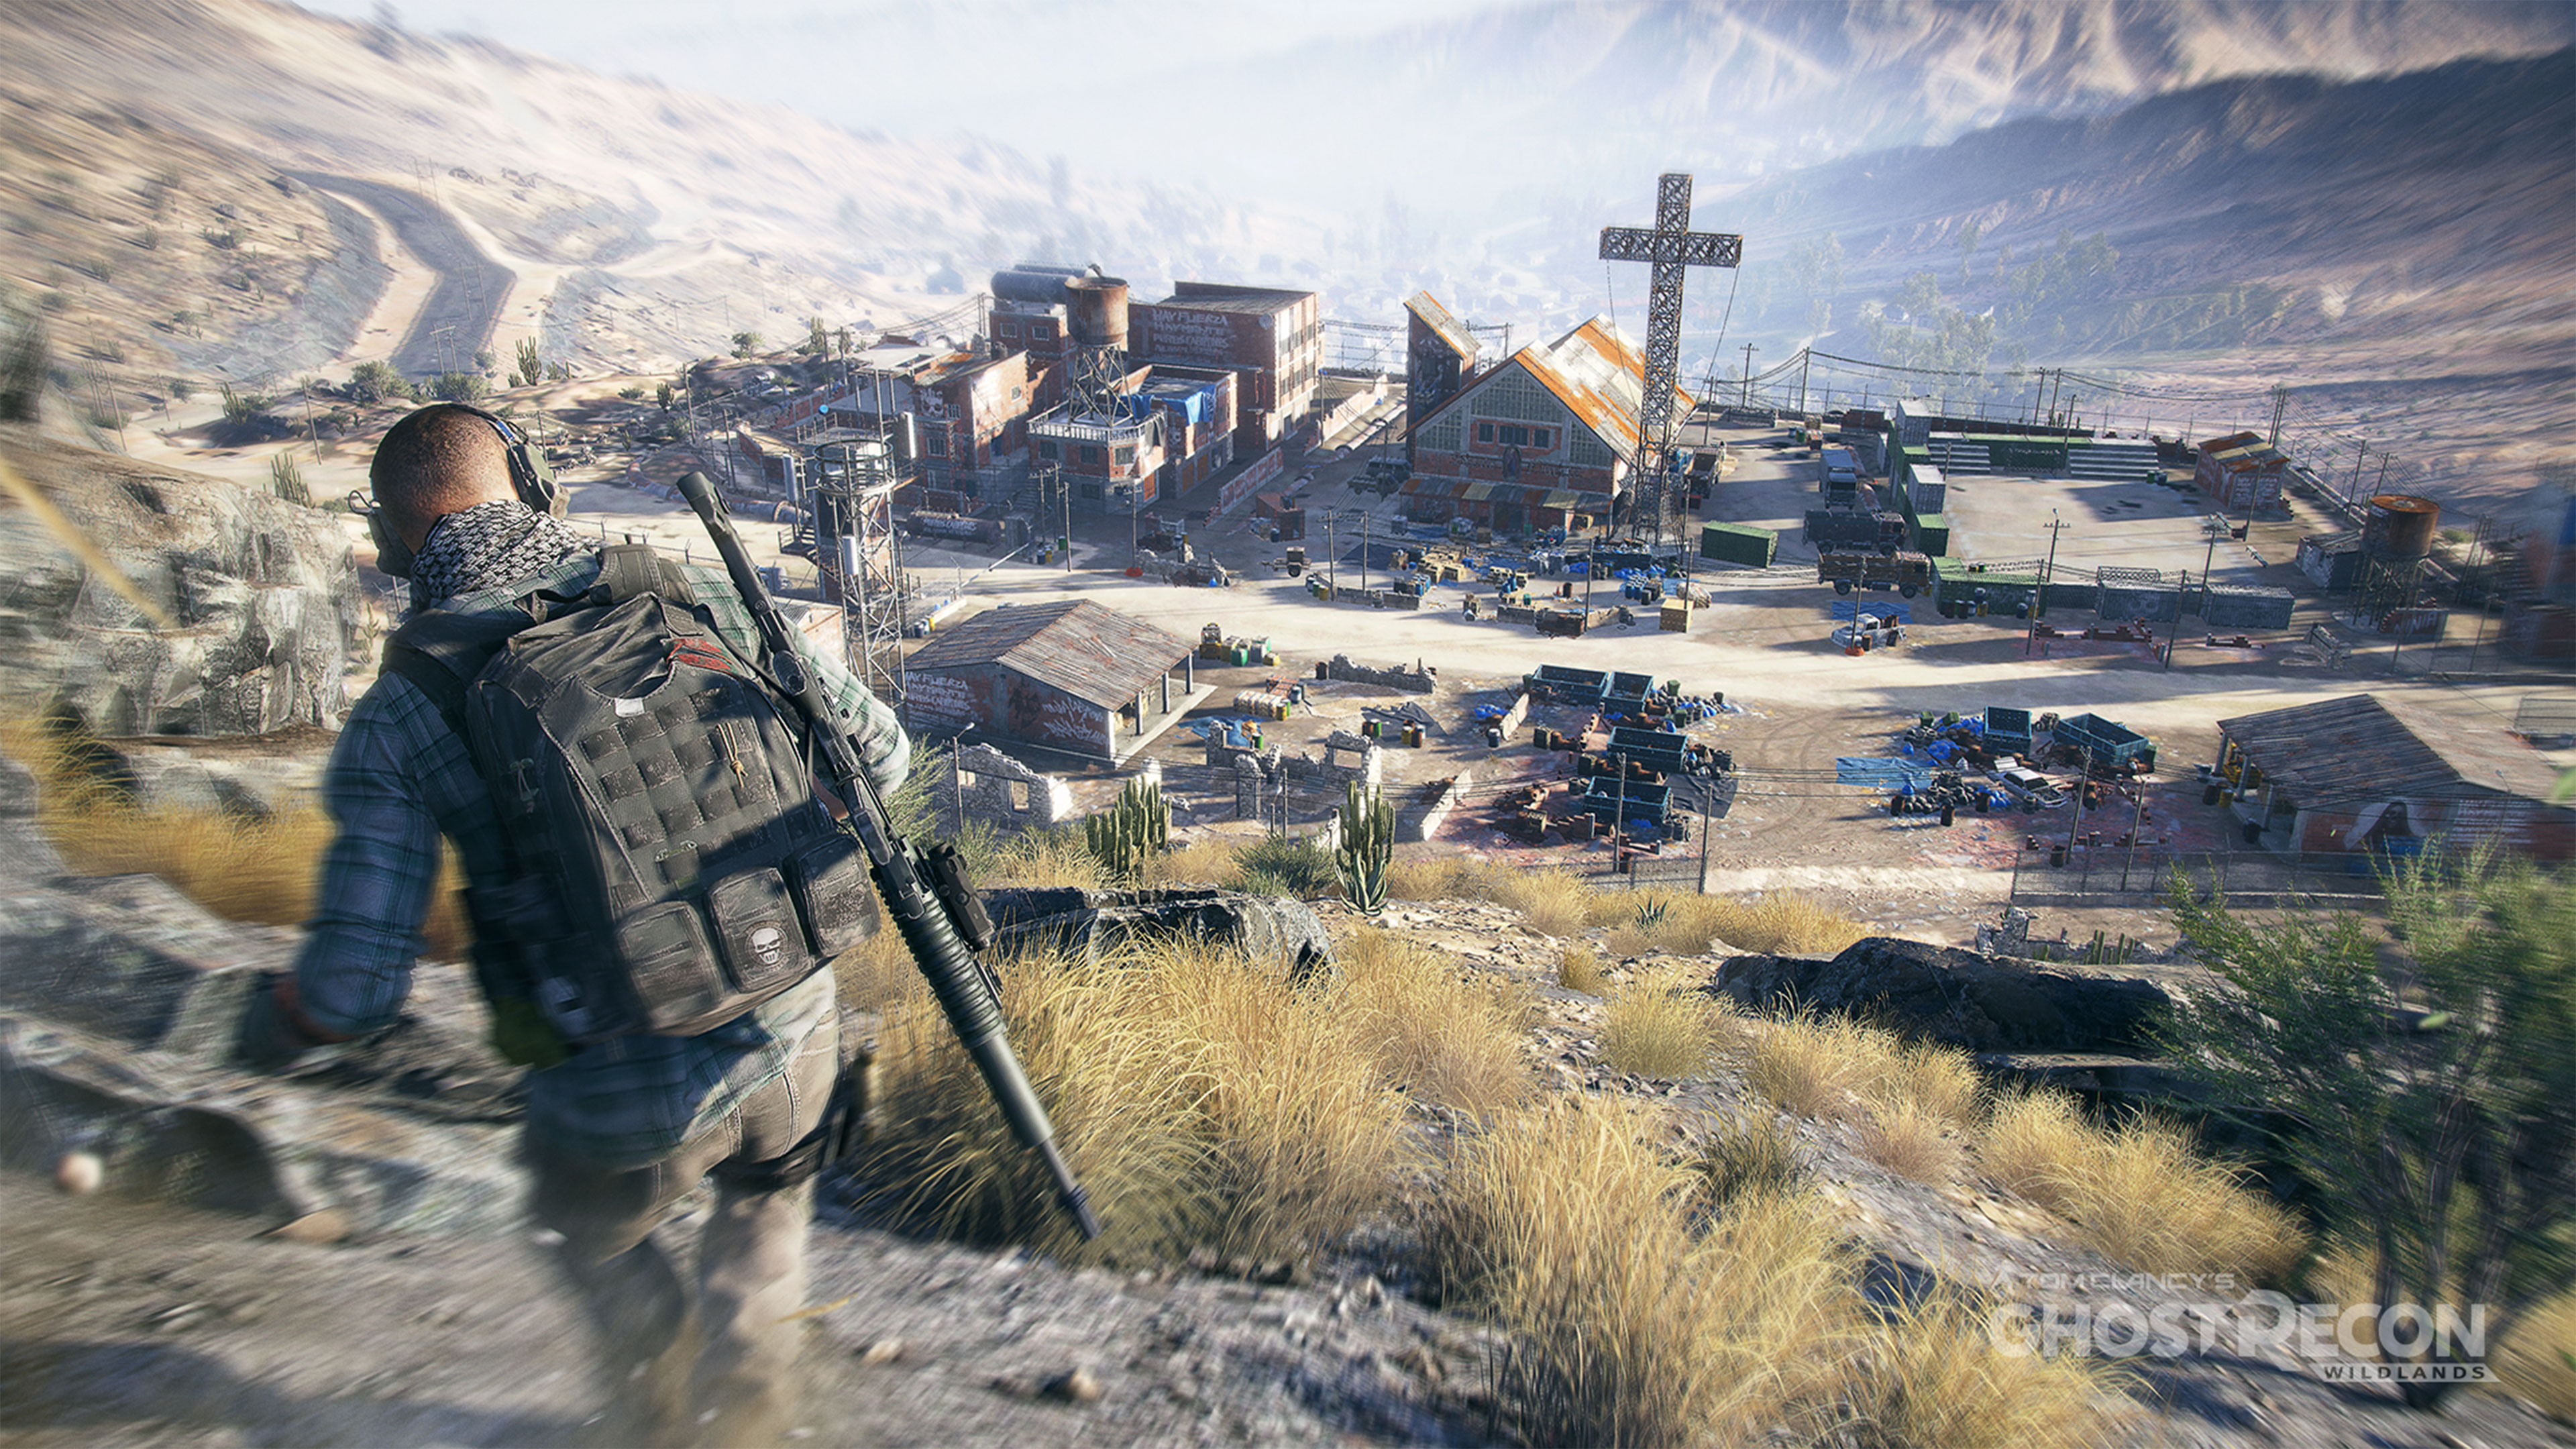 ghost recon wildlands wallpaper,pc game,strategy video game,soldier,screenshot,shooter game